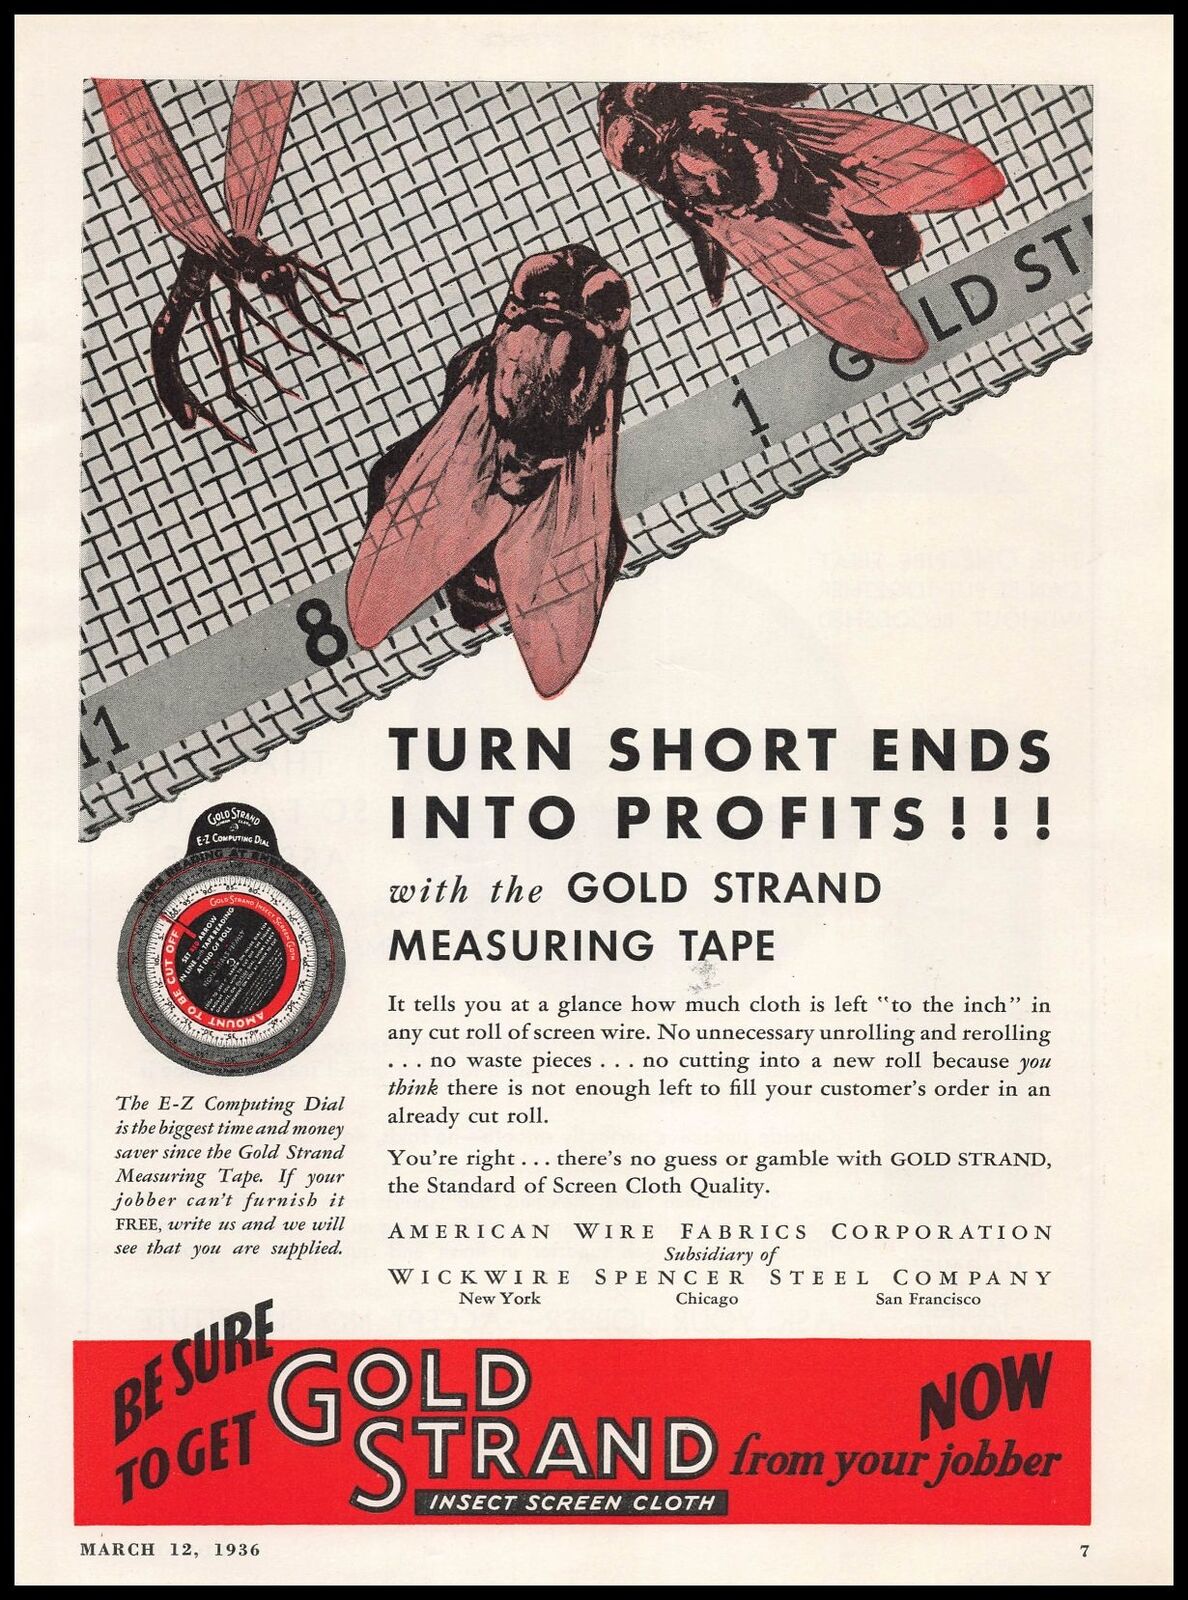 1936 American Wire Fabrics Wickwire Spencer Gold Strand Measuring Tape Print Ad